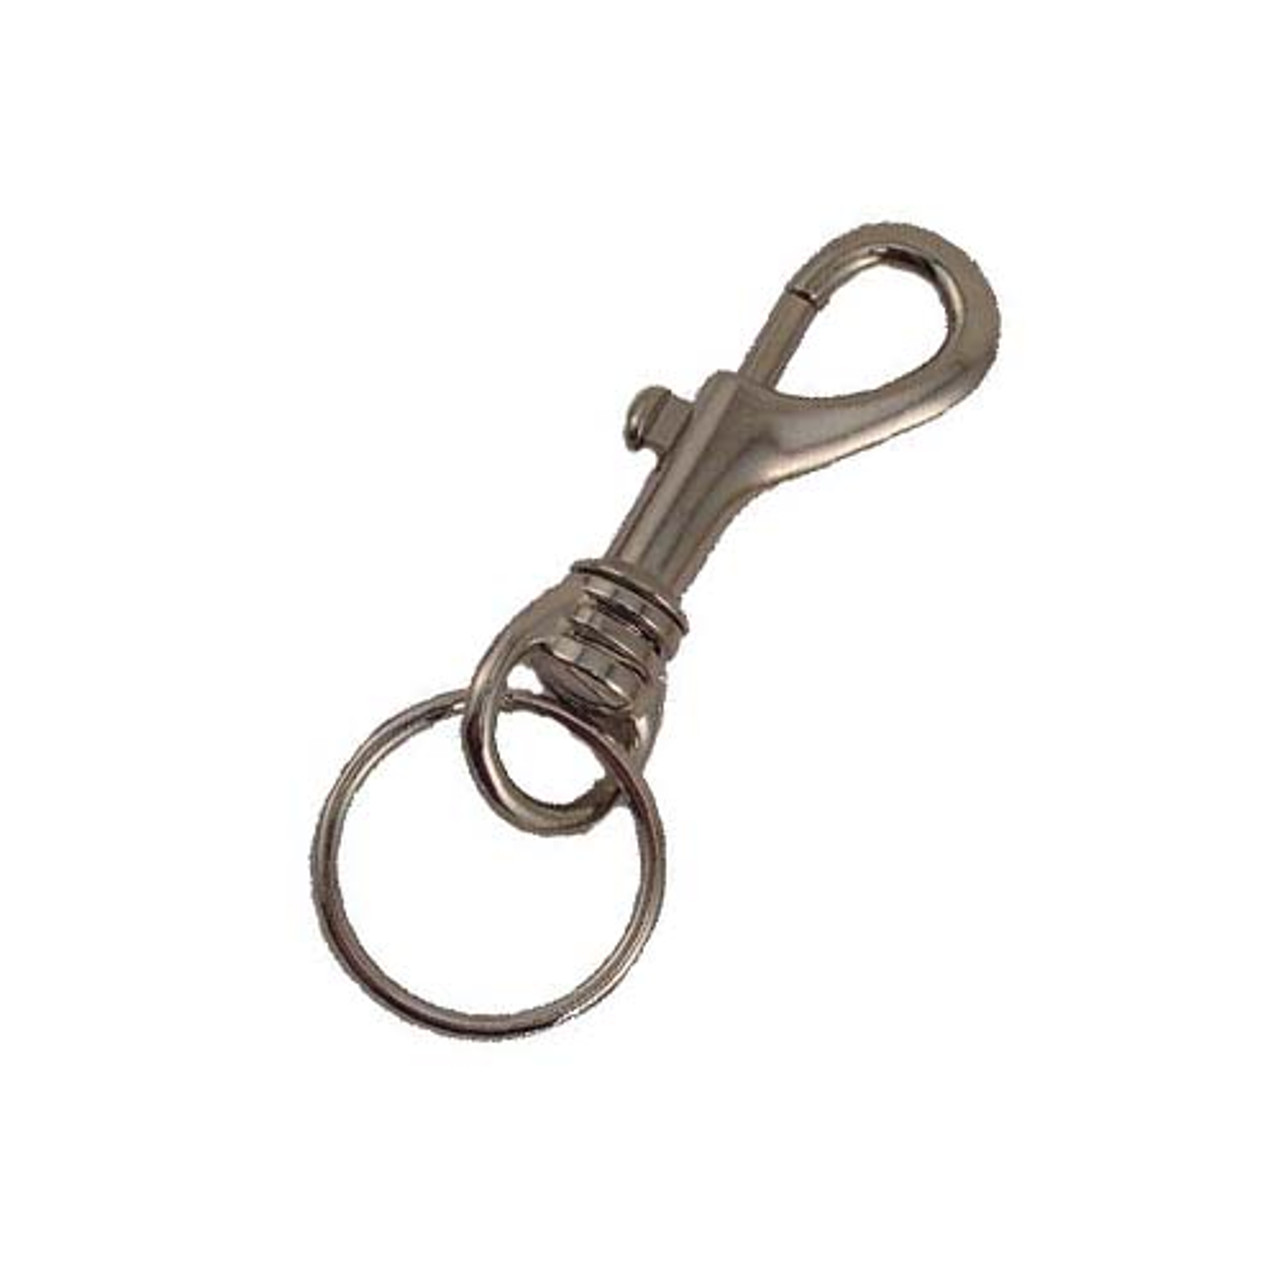 Shop for and Buy Bonanza Clip Economy Snap Clip Key Ring - Nickel Plated at  . Large selection and bulk discounts available.